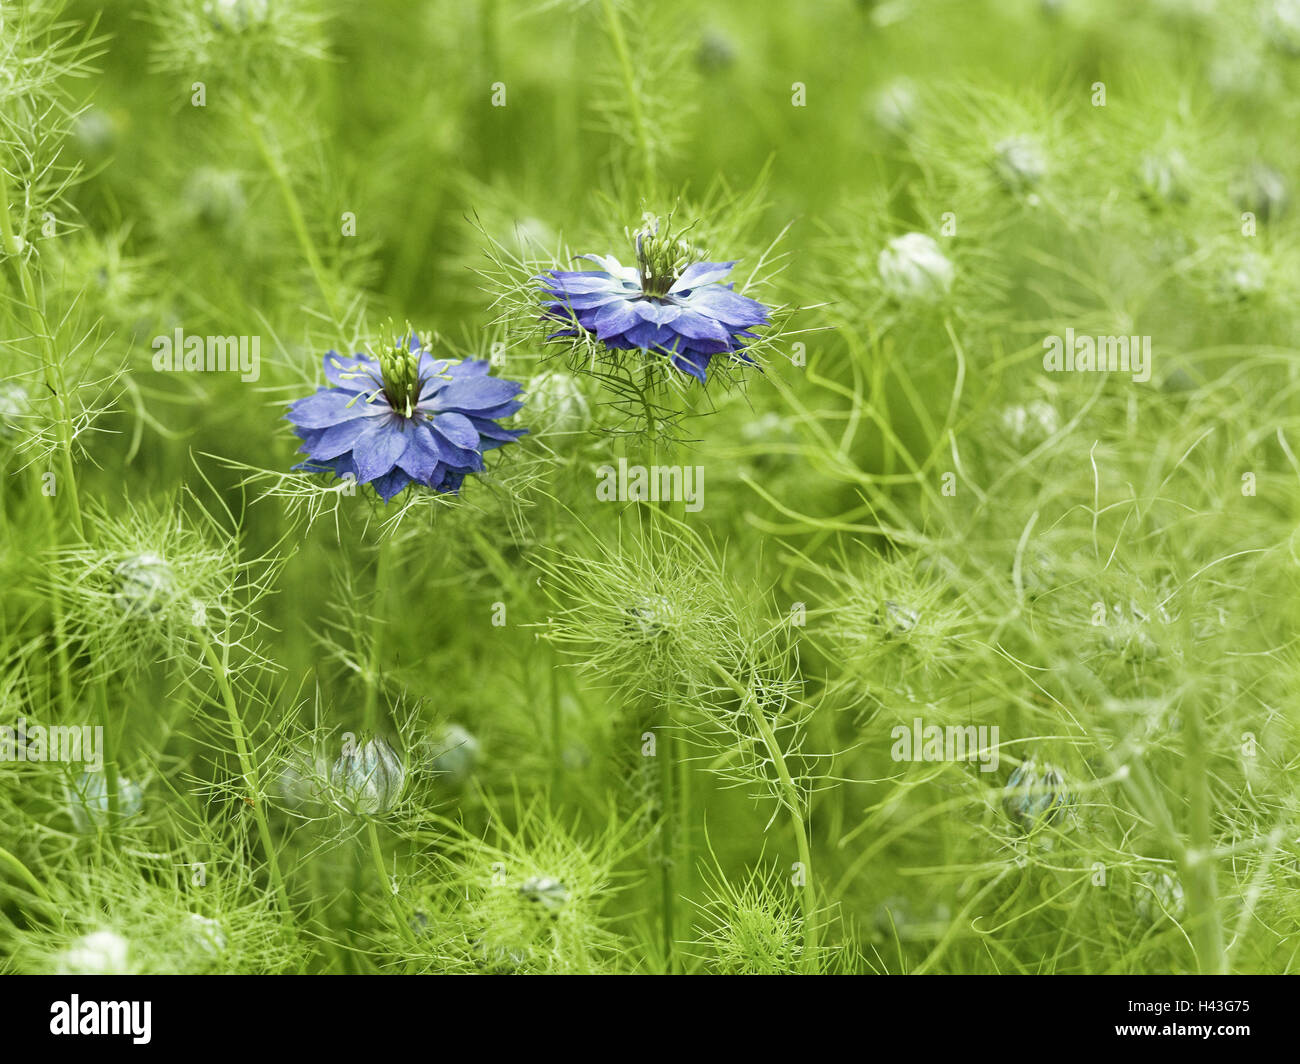 Spinster in the Green, Nigella damascena, plant, crowfoot plant, black cumin, one-year-old, cultivated plant, caraway, nature medicine, ornamental plant, cottage gardens, herbs, medicinal plants, herbs, useful plant, blossom, period bloom, meadow, grass, Stock Photo